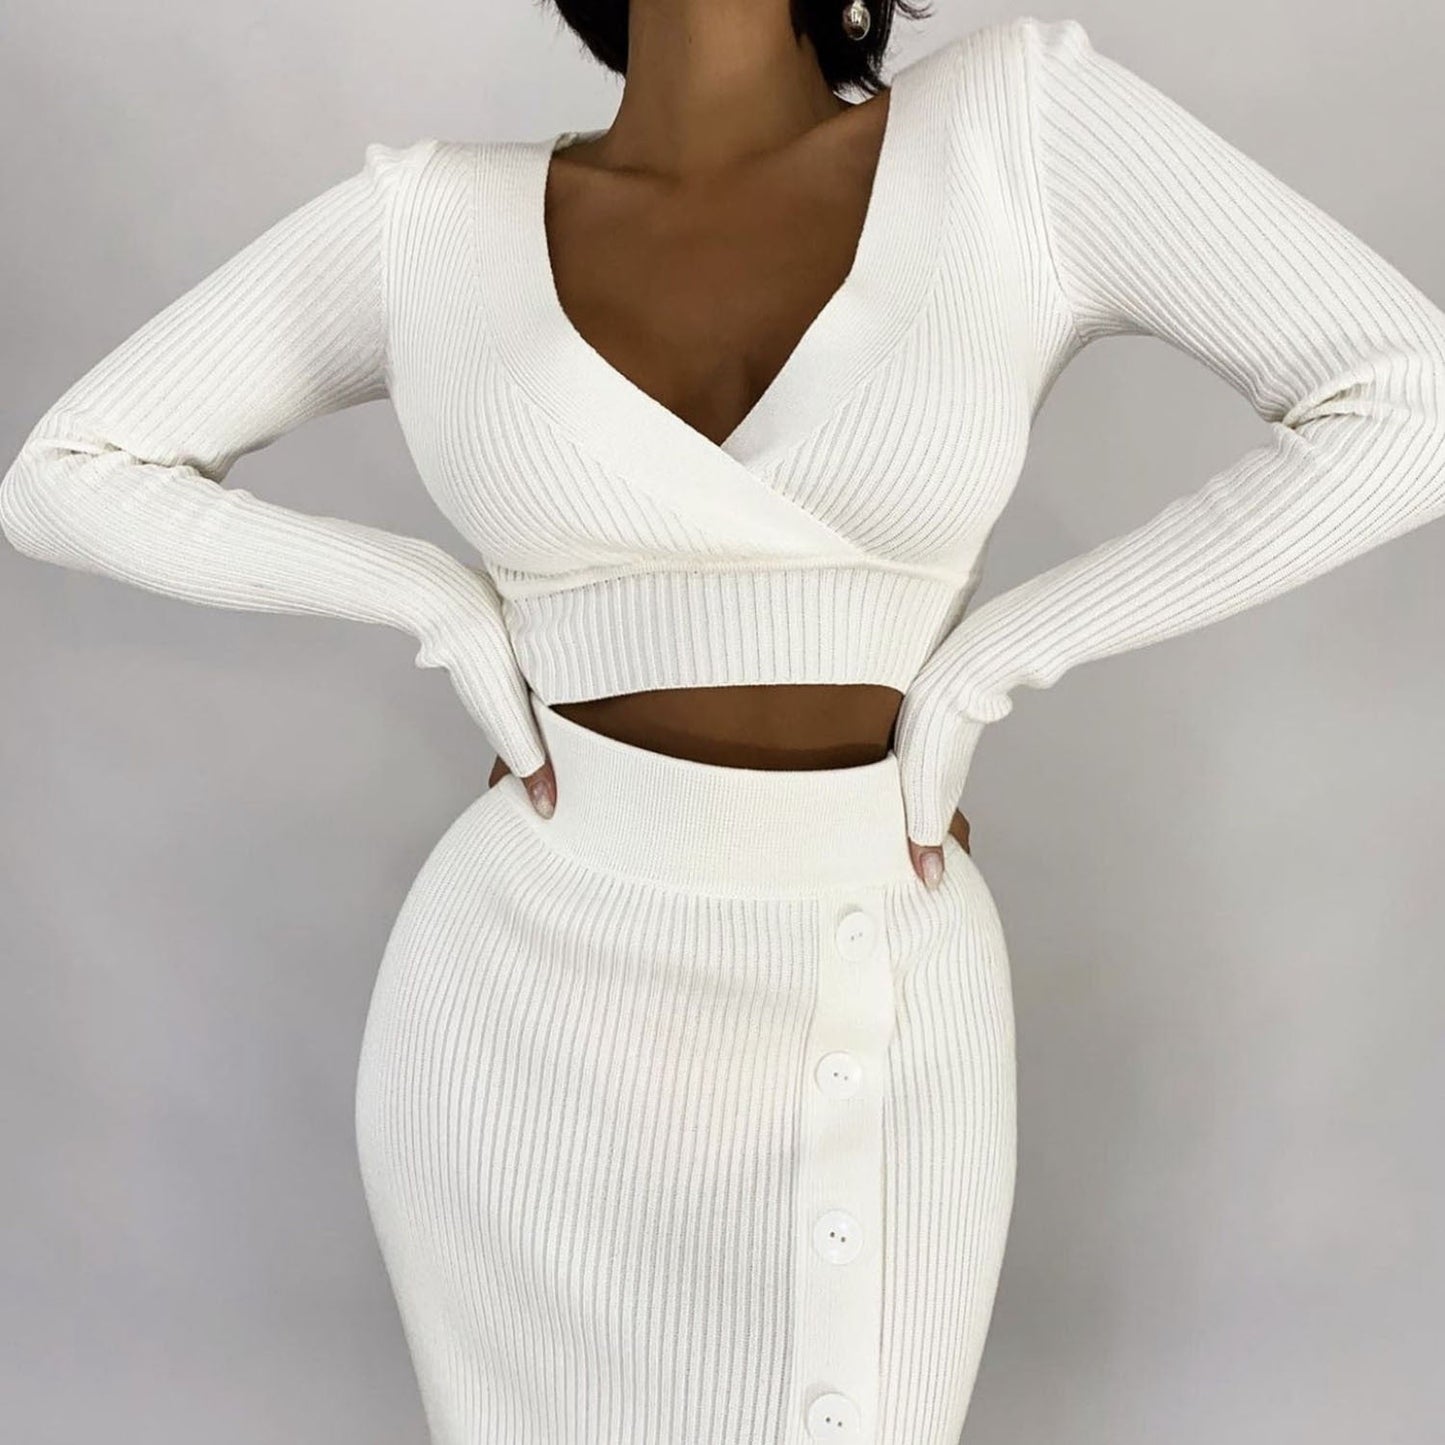 V-Neck Crop Top And Midi Skirt Sets Autumn Wrap Slim Bodycon Casual 2 Piece Sets Dress Outfits Women's Knitted Suit - Linions